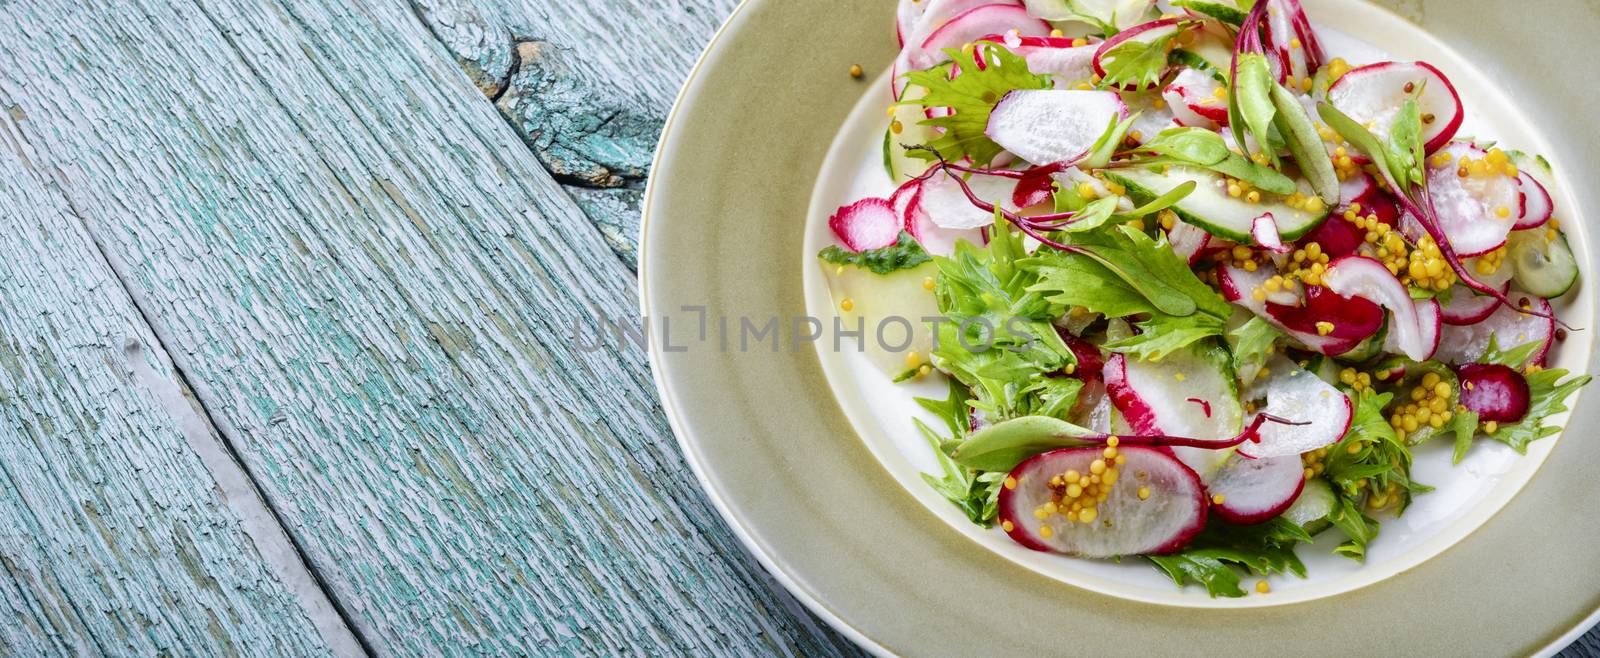 Healthy vegetarian salad with radish on kitchen table.Long banner